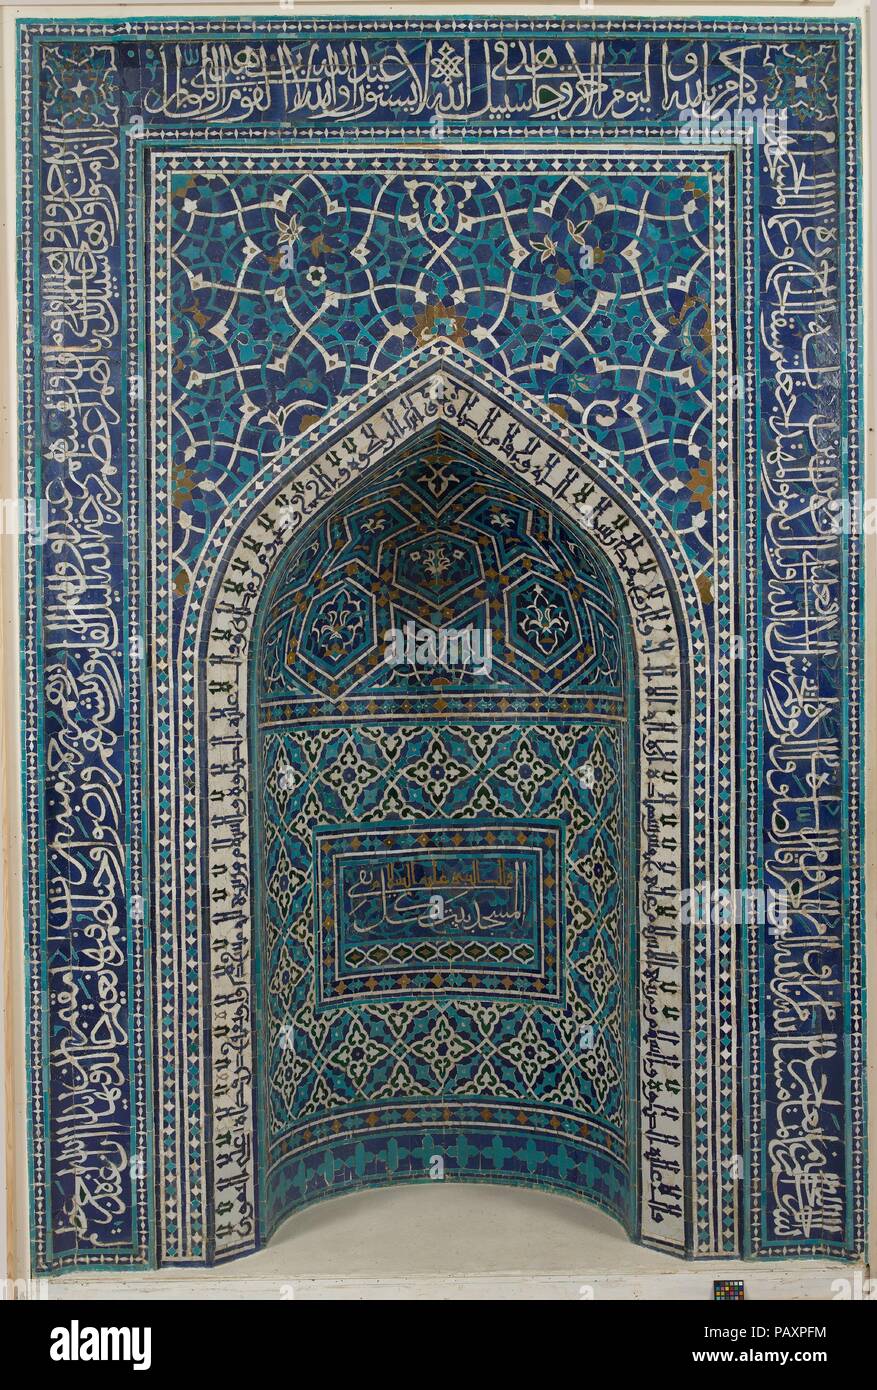 Mihrab (Prayer Niche). Dimensions: 135 1/16 x 113 11/16in. (343.1 x 288.7cm)  Storage box: 99 x 41 1/2 in. (251.5 x 105.4 cm)  Wt. 4,500 lbs. (2041.2 kg). Date: A.H. 755/A.D. 1354-55.  Arabic Inscription (on the outer border in thuluth script):  Qur'an 9:18-22  Arabic Inscription (framing the niche of the mihrab containing hadith of Prophet Muhammad in kufic script):  'Said [the Prophet] (on him be blessing and peace): . . . witness that there is no God save Allah and that Muhammad is his Apostle and the Blessed Imam, and in legal almsgiving, and in the pilgrimage, and in the fast of Ramadan,  Stock Photo